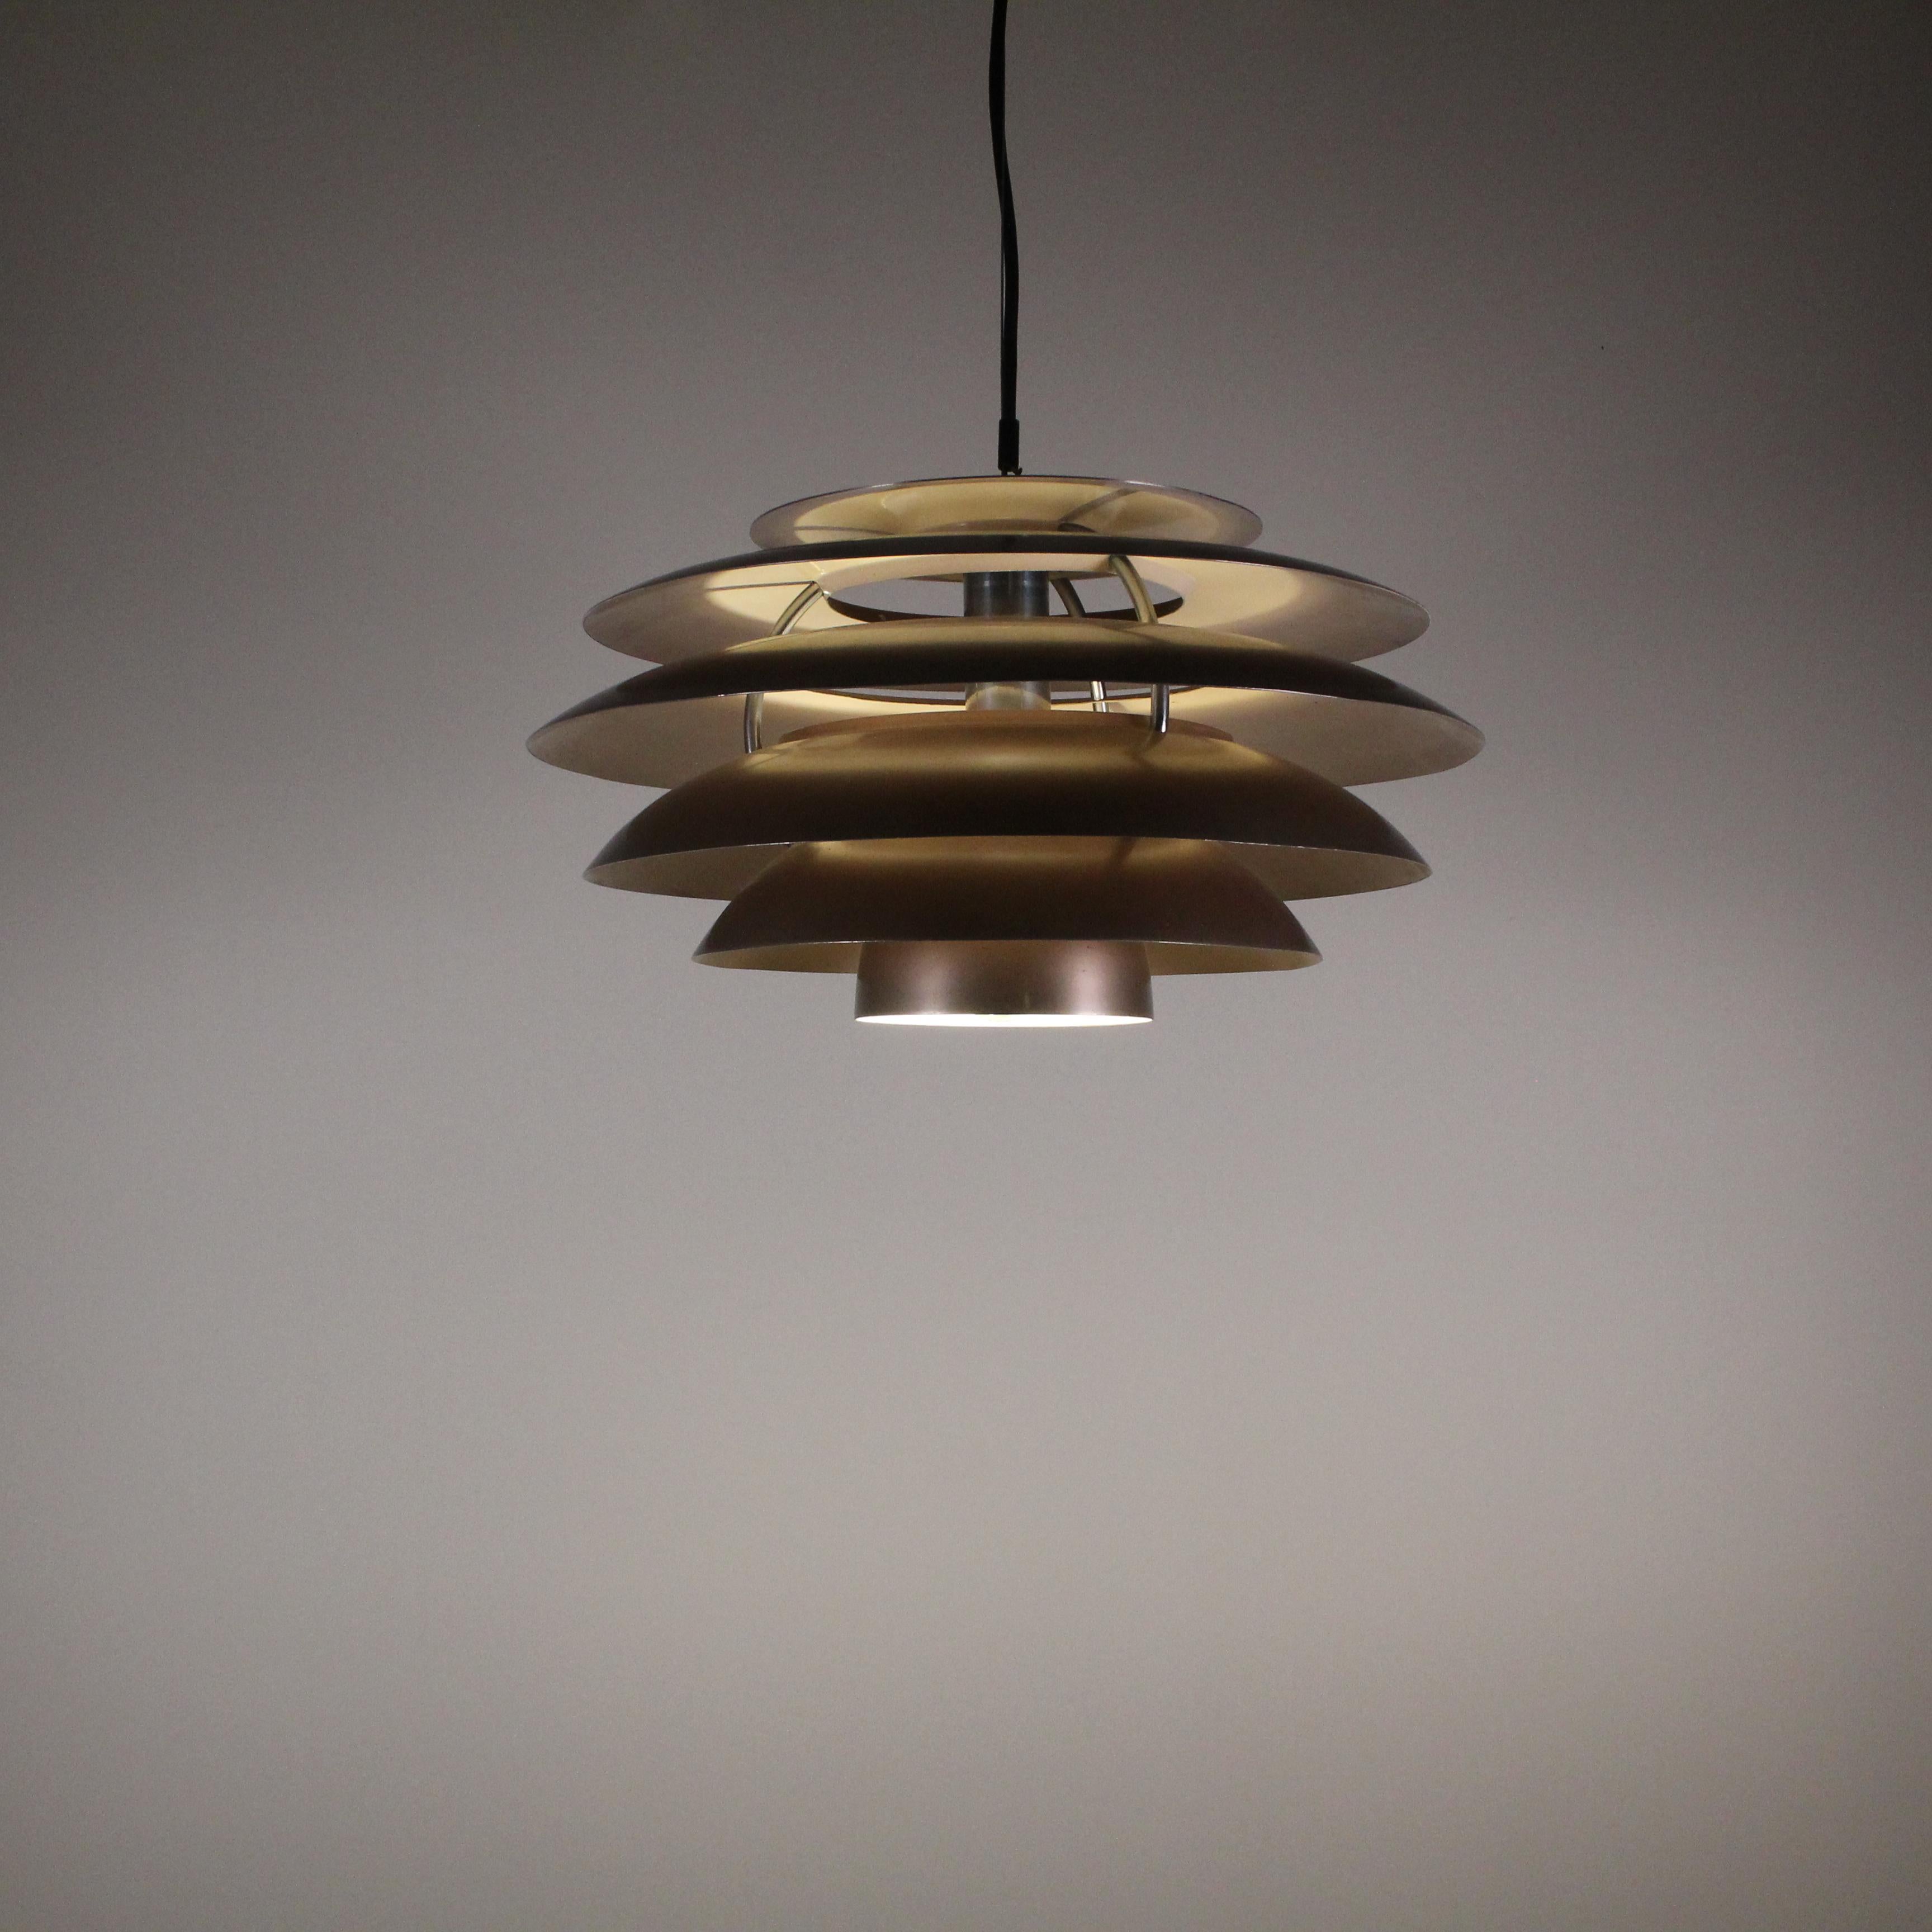 The Stilnovo Mod. 1262 chandelier, created in 1965, is a masterpiece of Italian design. Featuring clean, minimalist lines, this chandelier embodies the modern aesthetic of the era. Its elegant and streamlined structure, made of materials such as